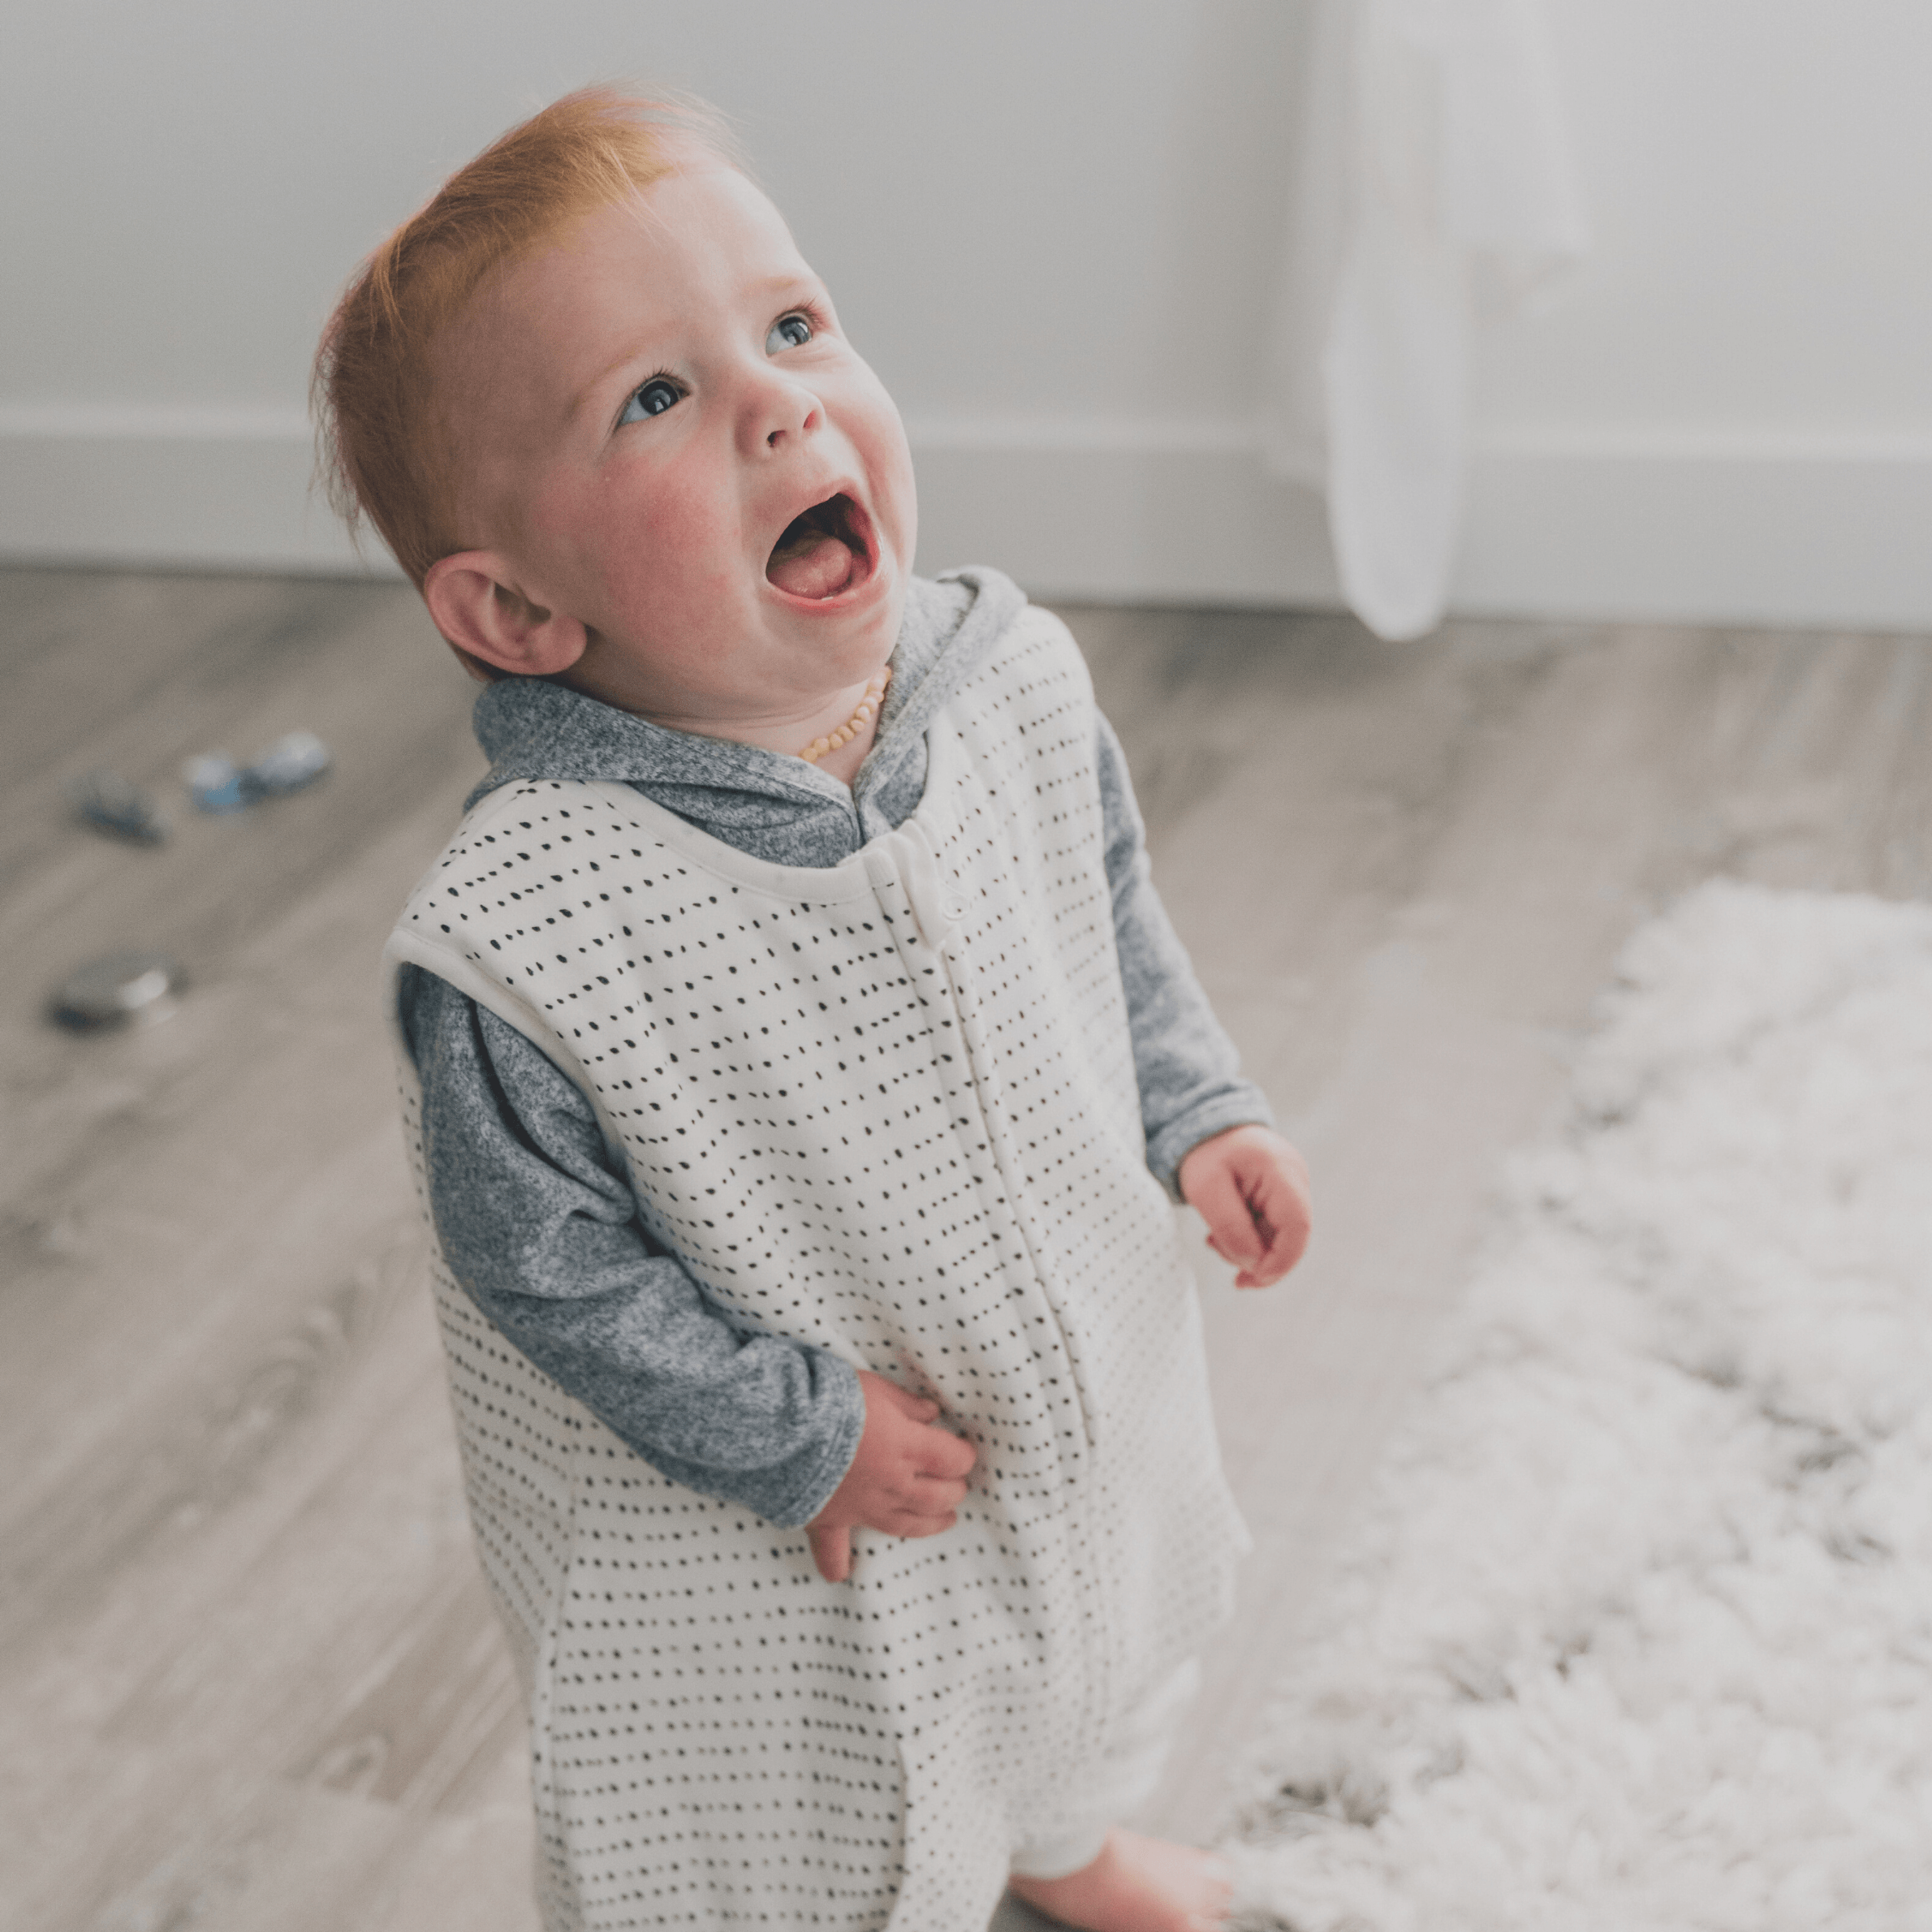 6 Effective ways to manage your toddler’s tantrums at bedtime